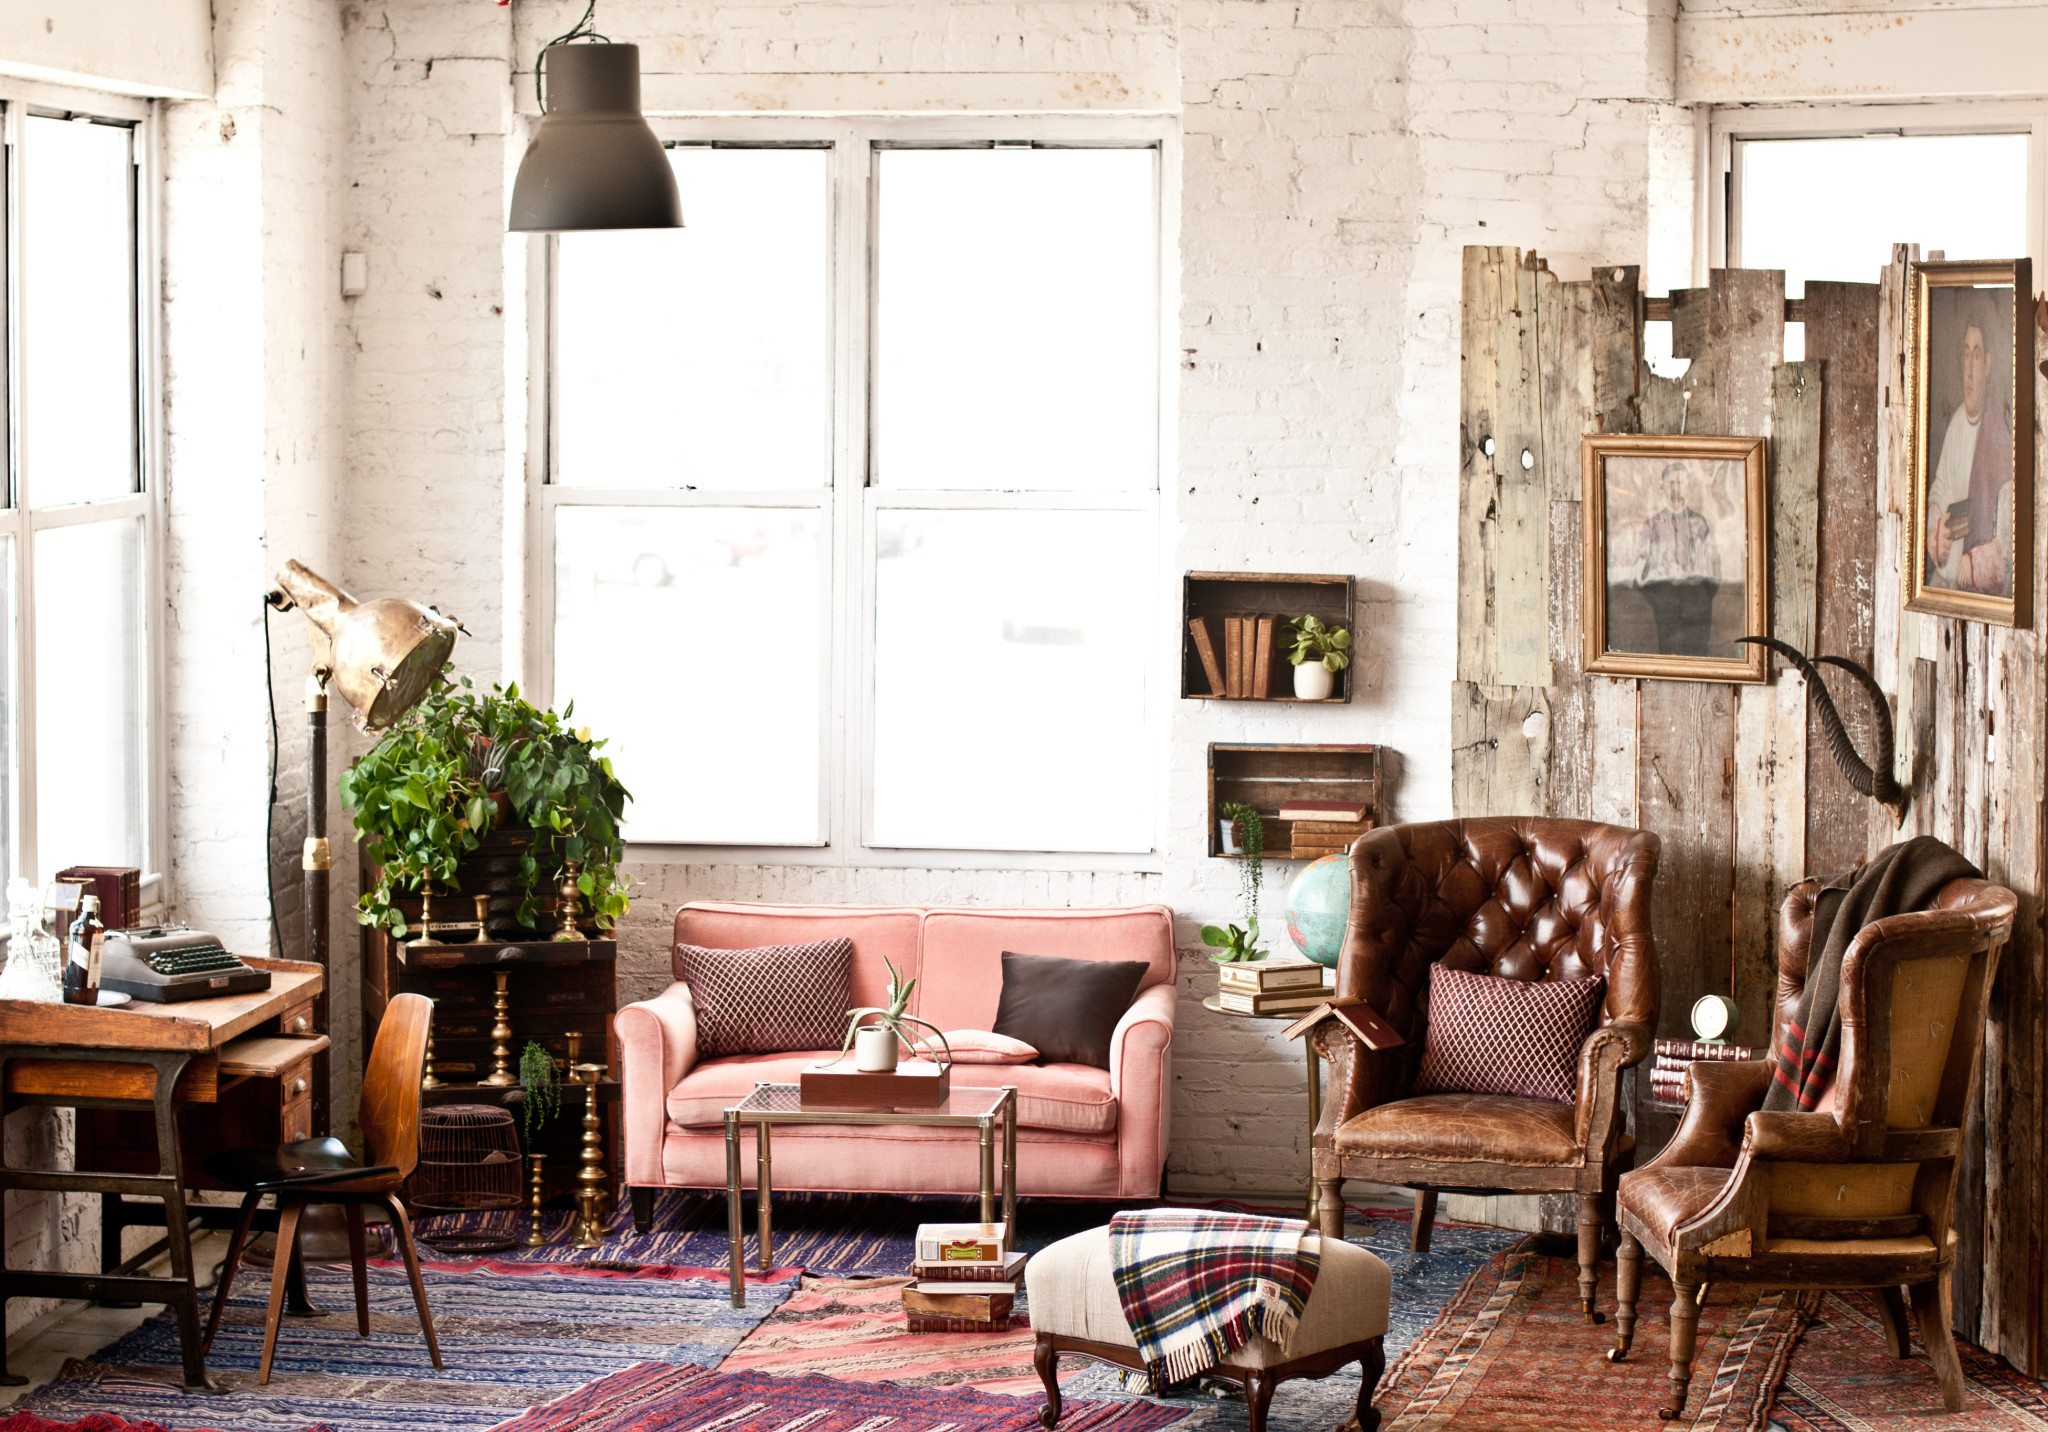 8 Decorating Ideas To Liven Up Your Home